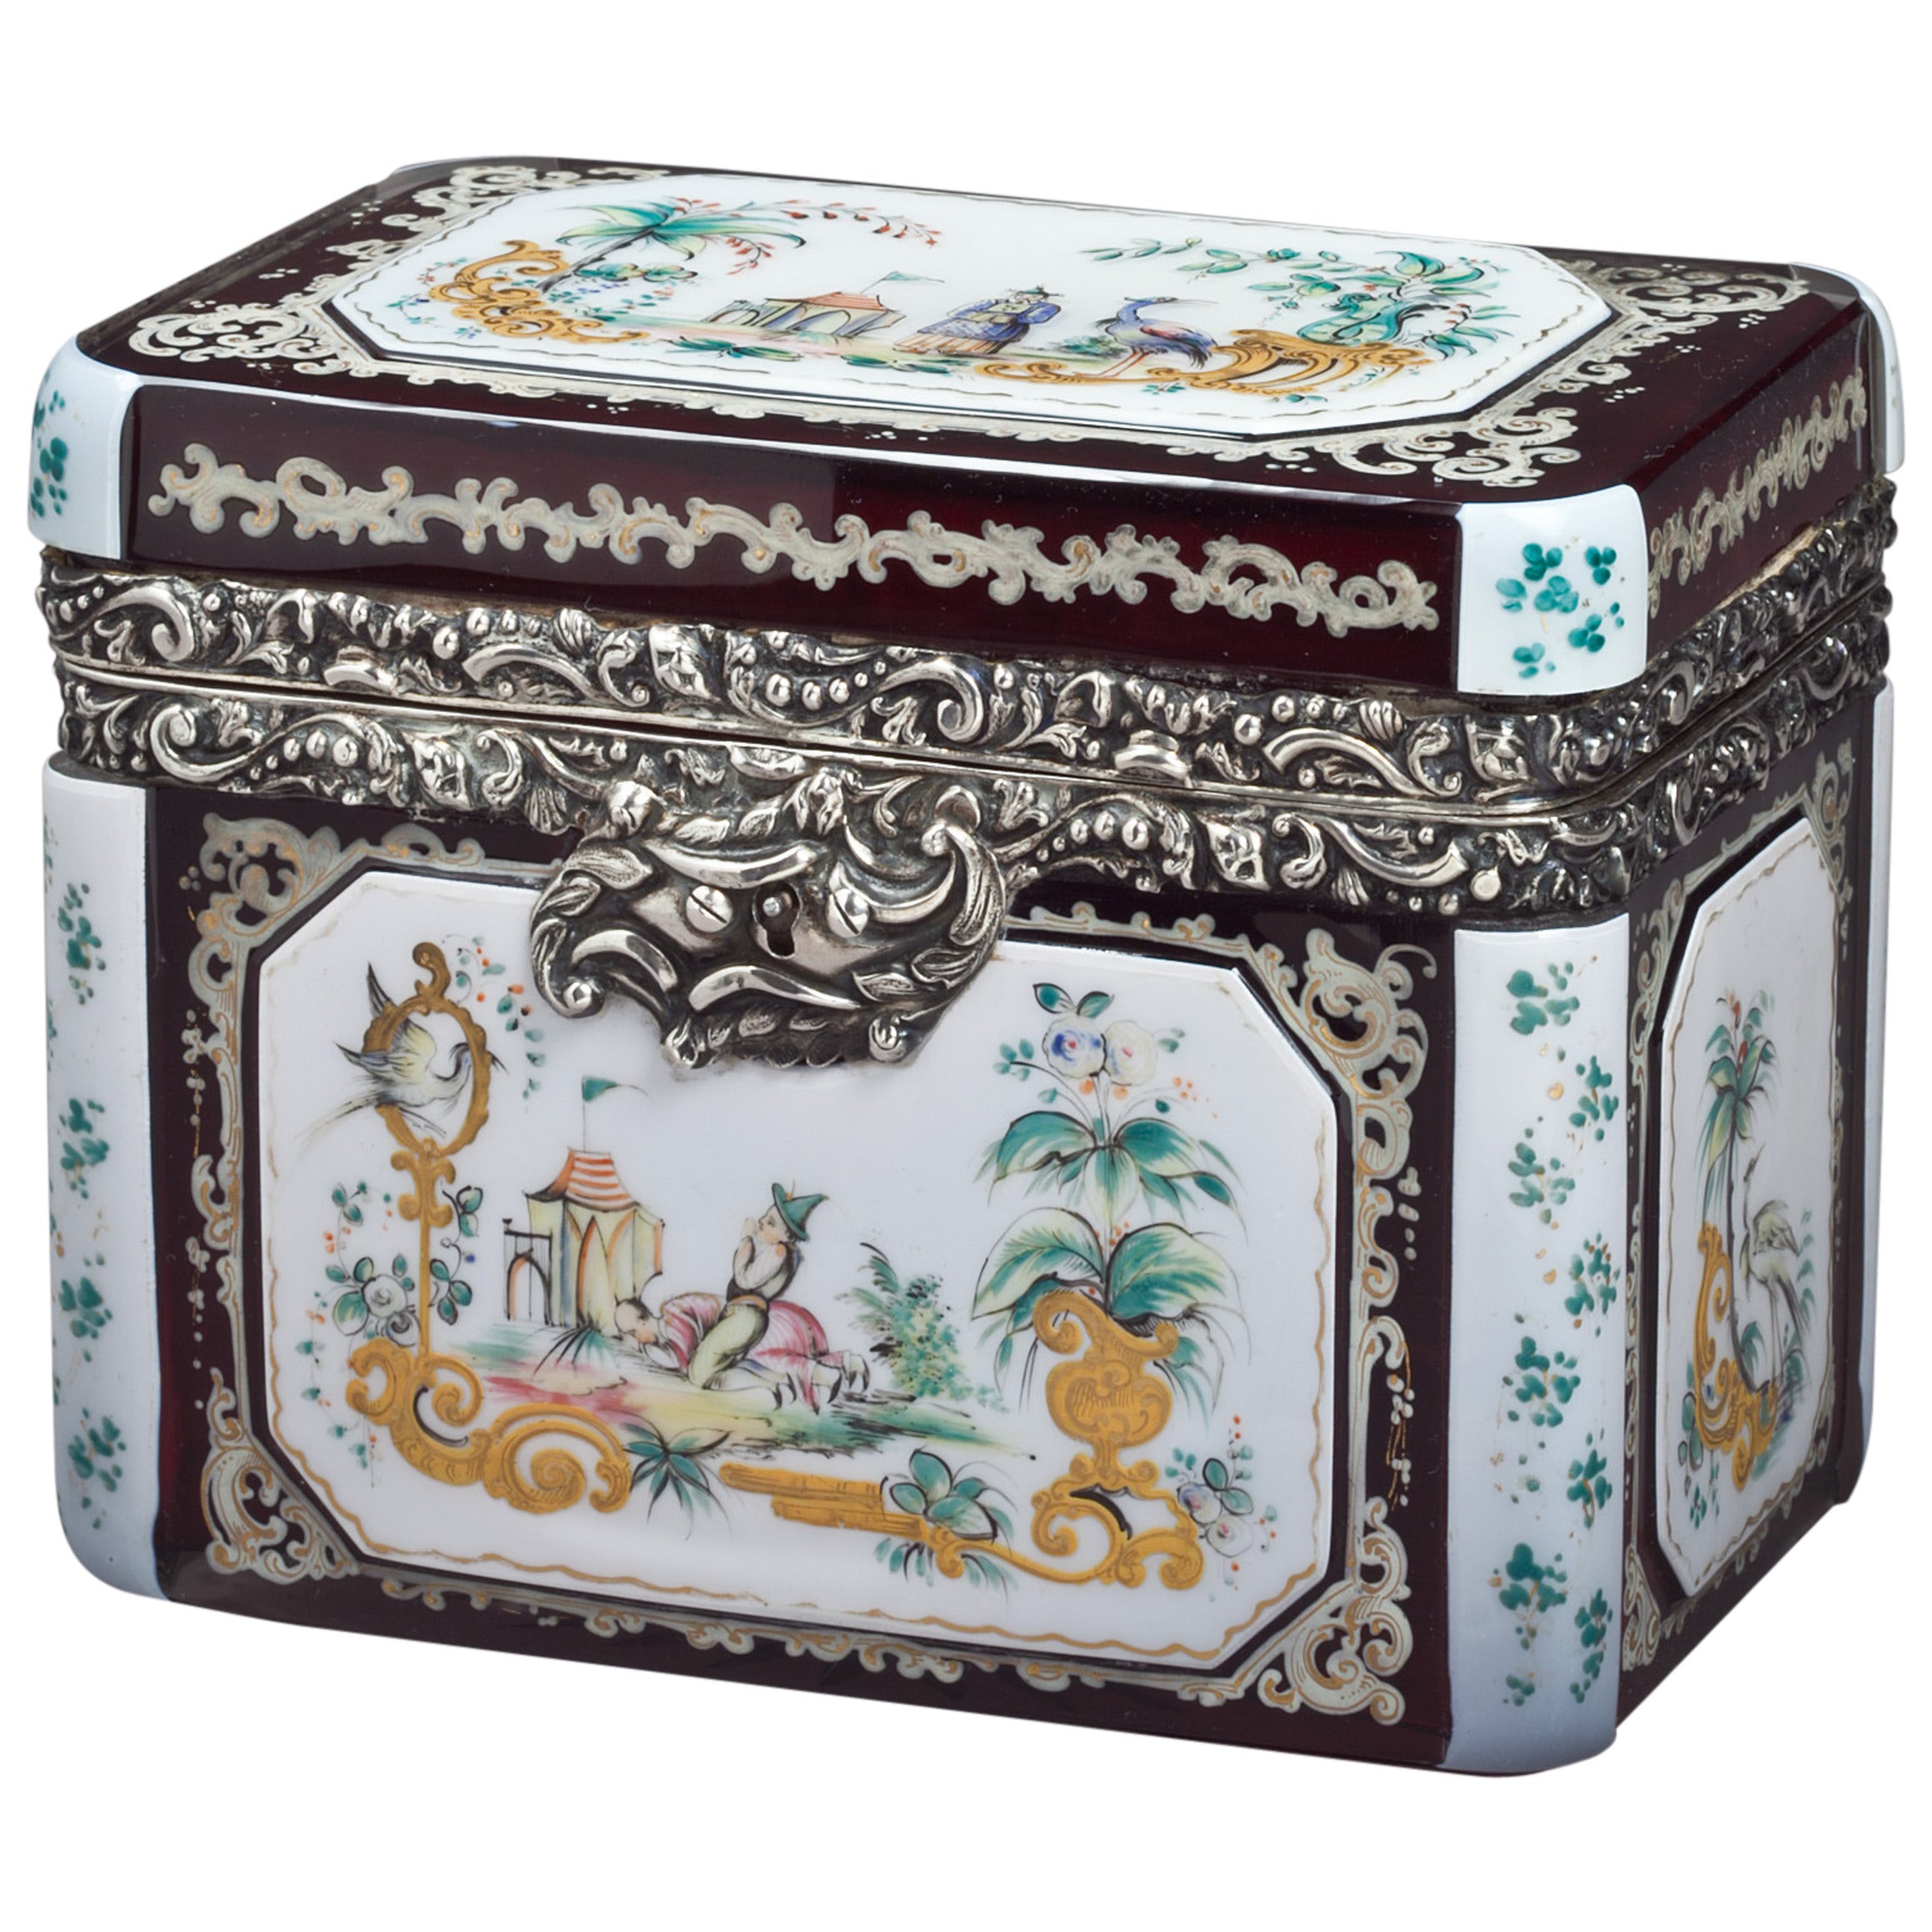 Bohemian Silver-Mounted Overlay and Enameled Box, Dated 1852